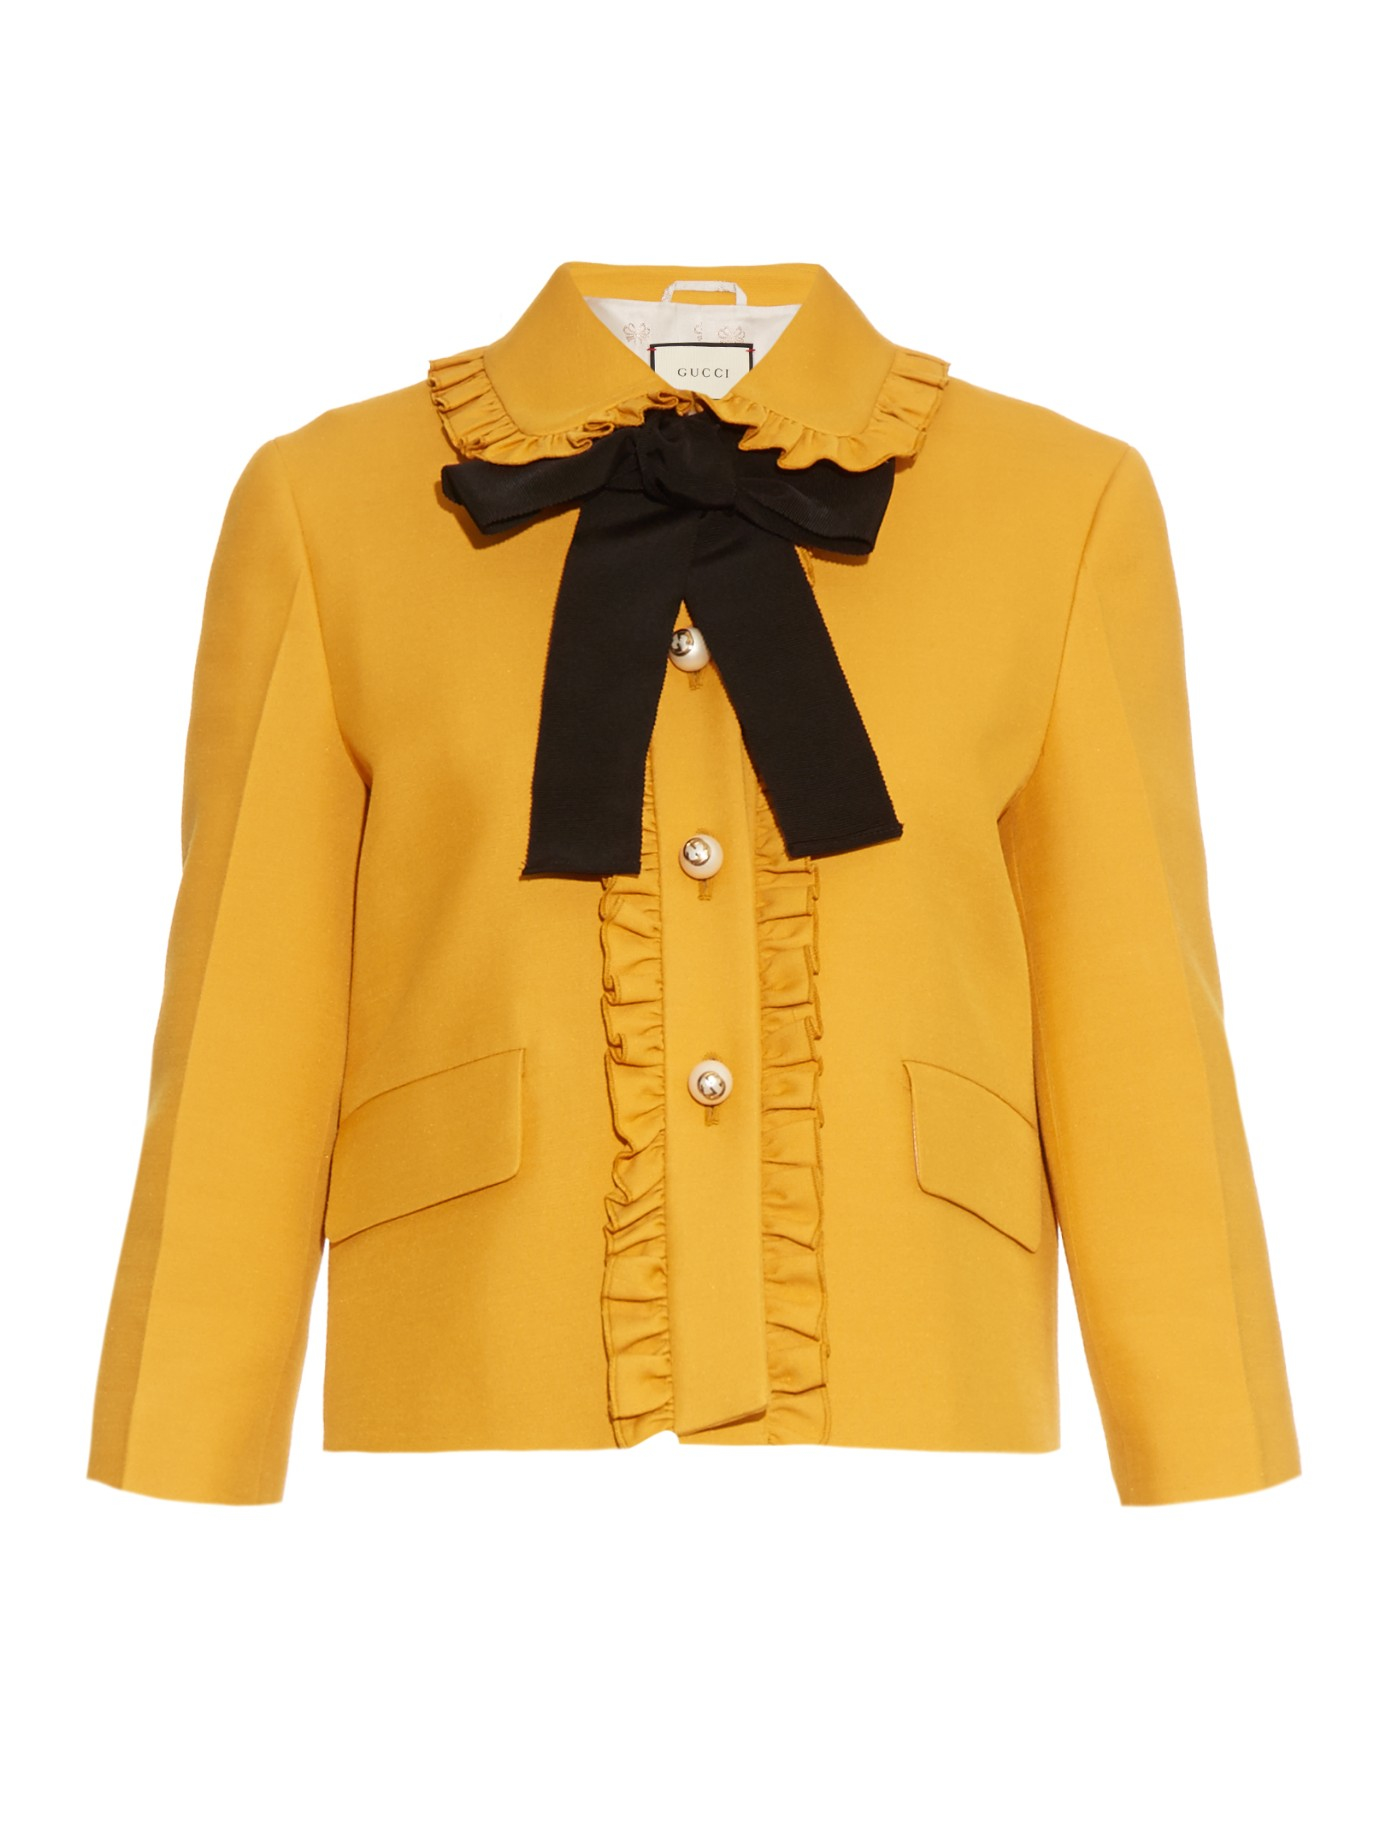 Gucci Ruffled-Trim Silk and Wool-Blend Jacket in Yellow | Lyst